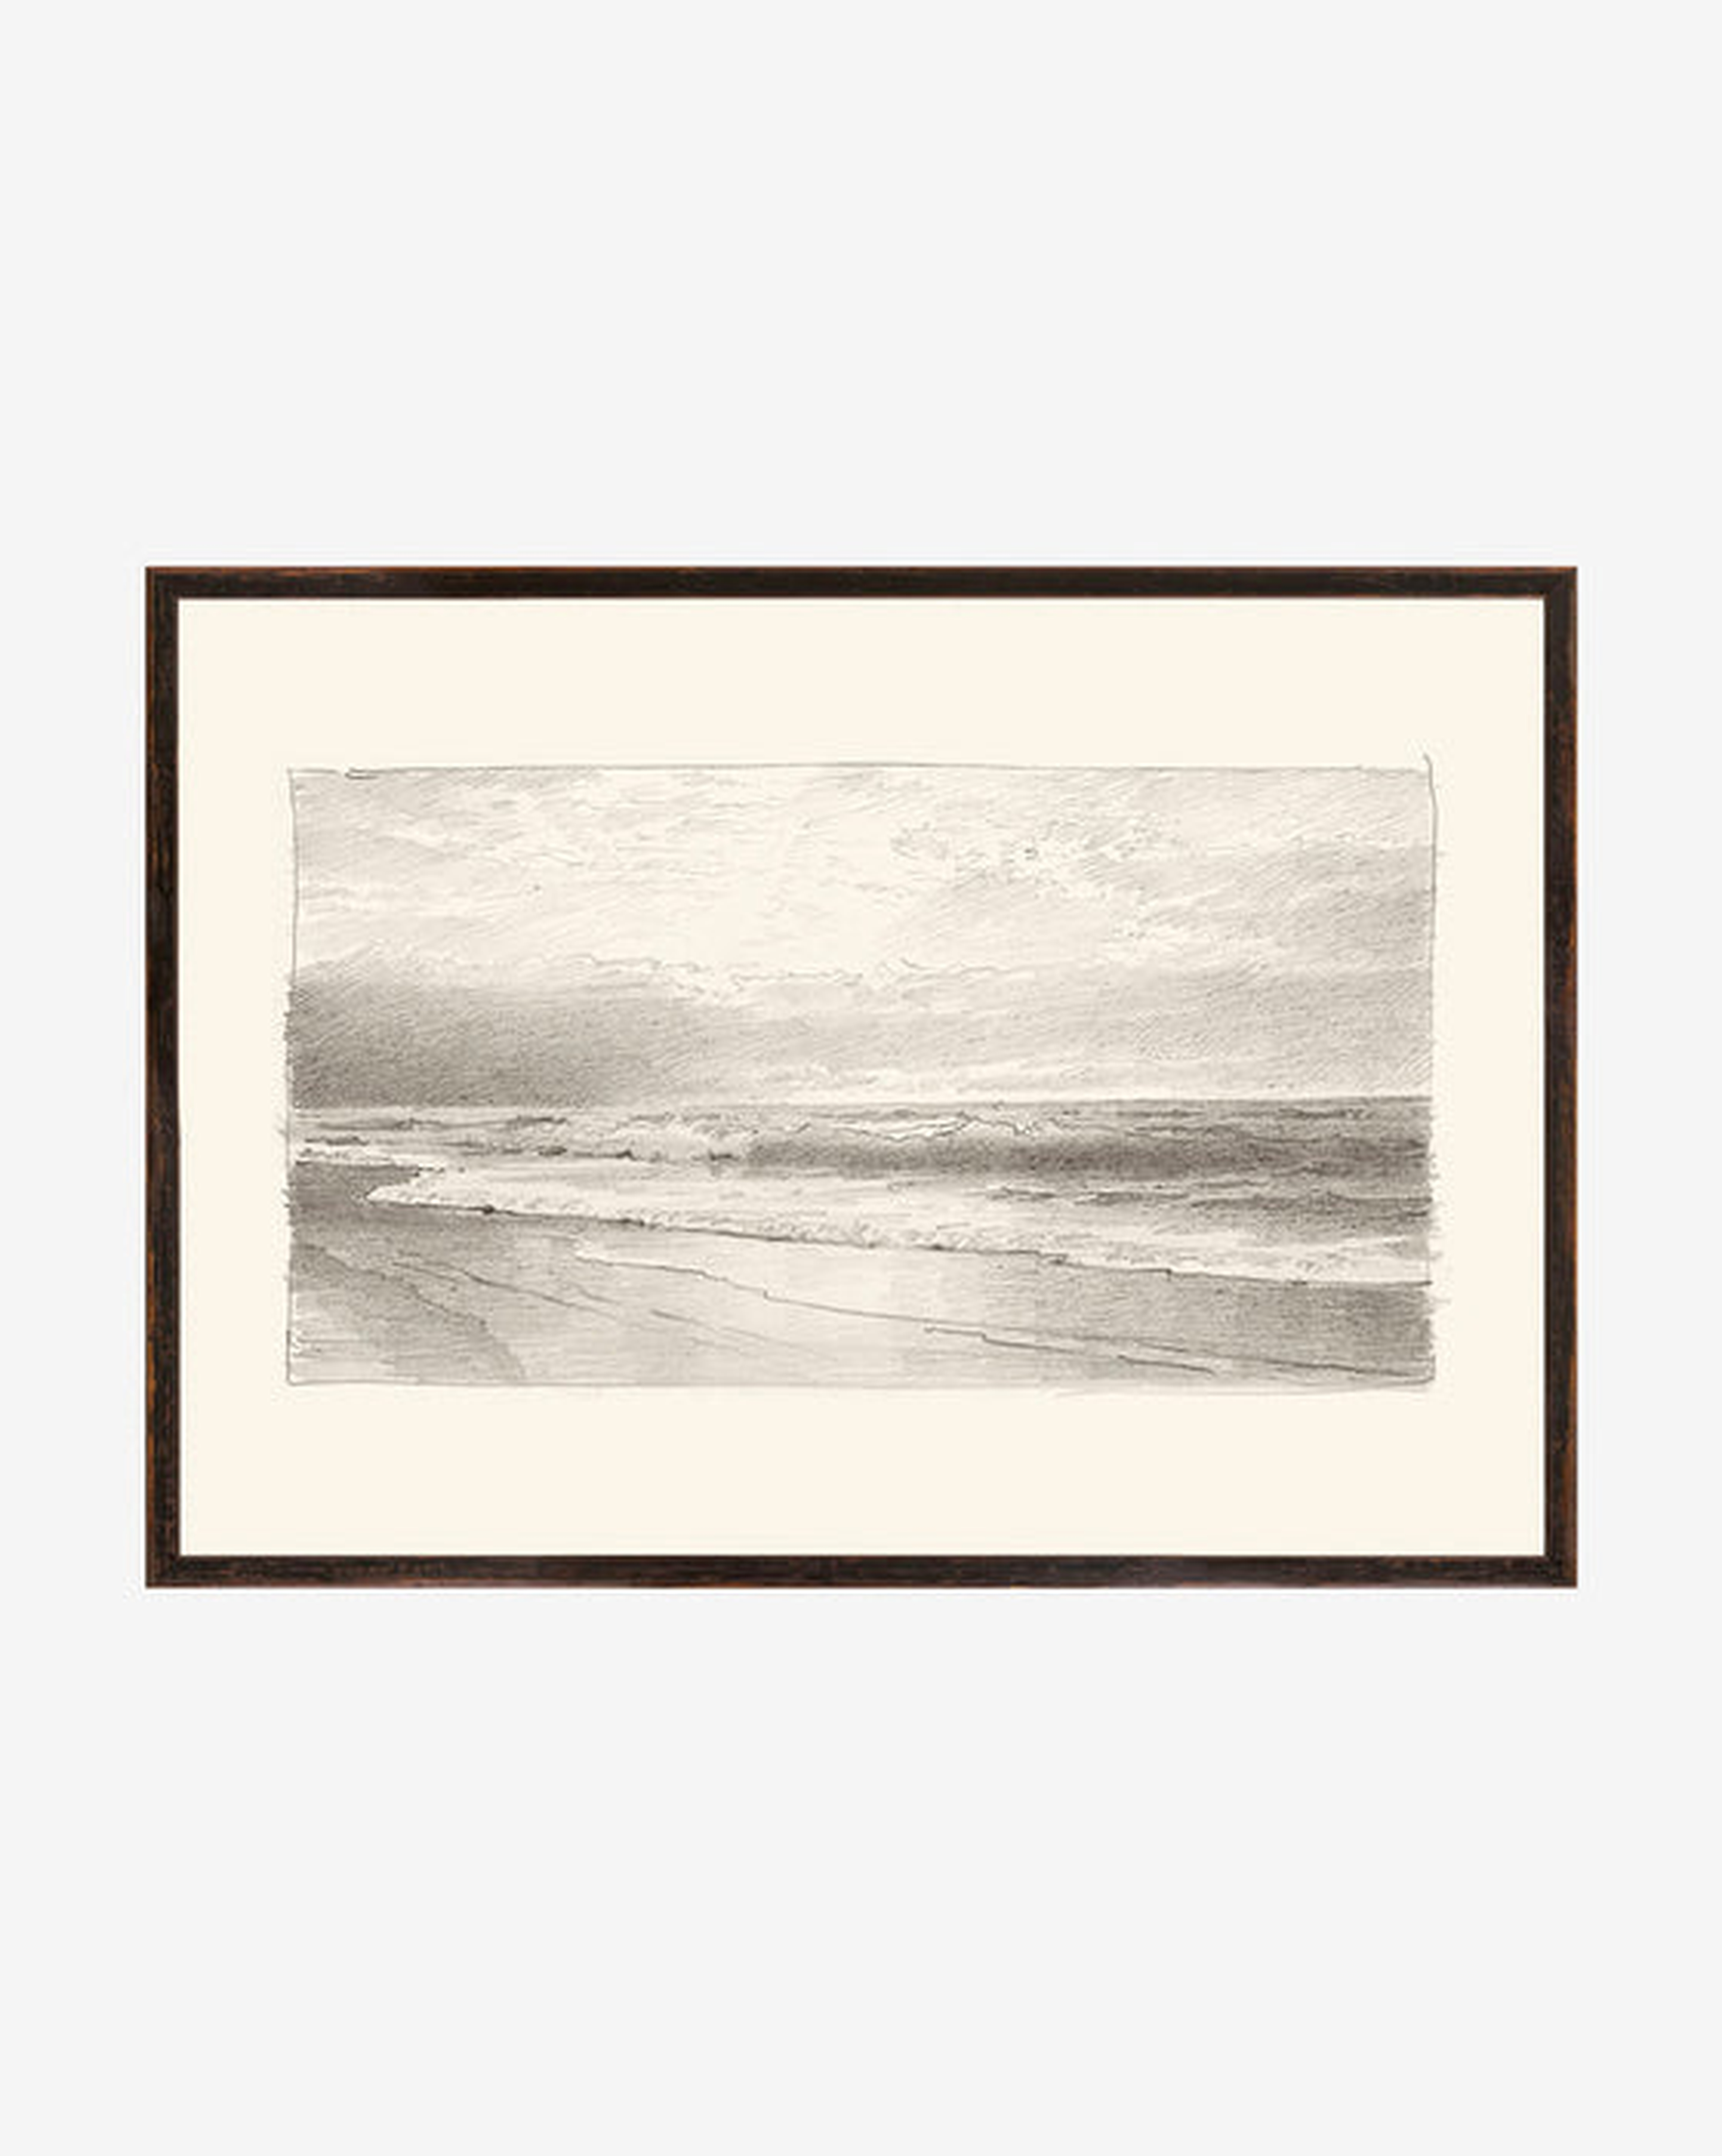 BEACH SKETCH Framed/ made to order - McGee & Co.